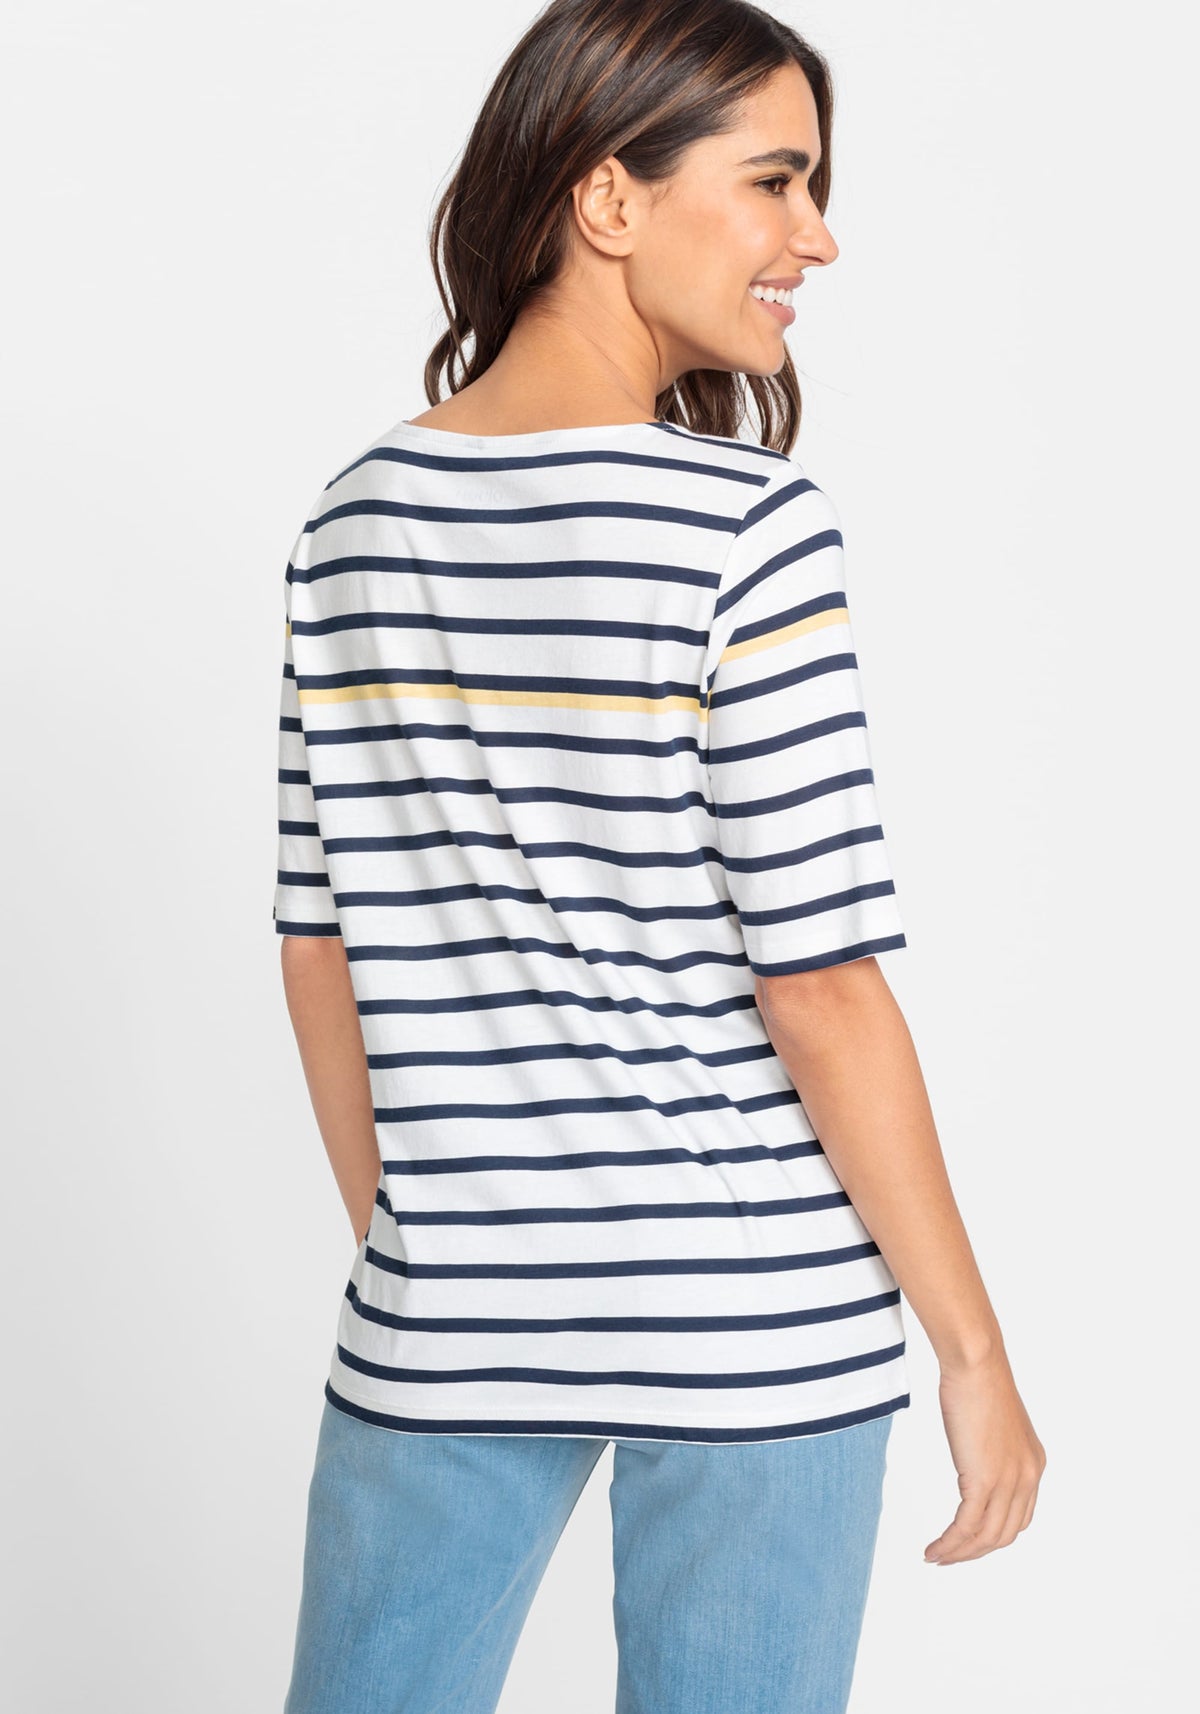 Short Sleeve Stripe and Placement Print Shirt containing TENCEL™ Modal